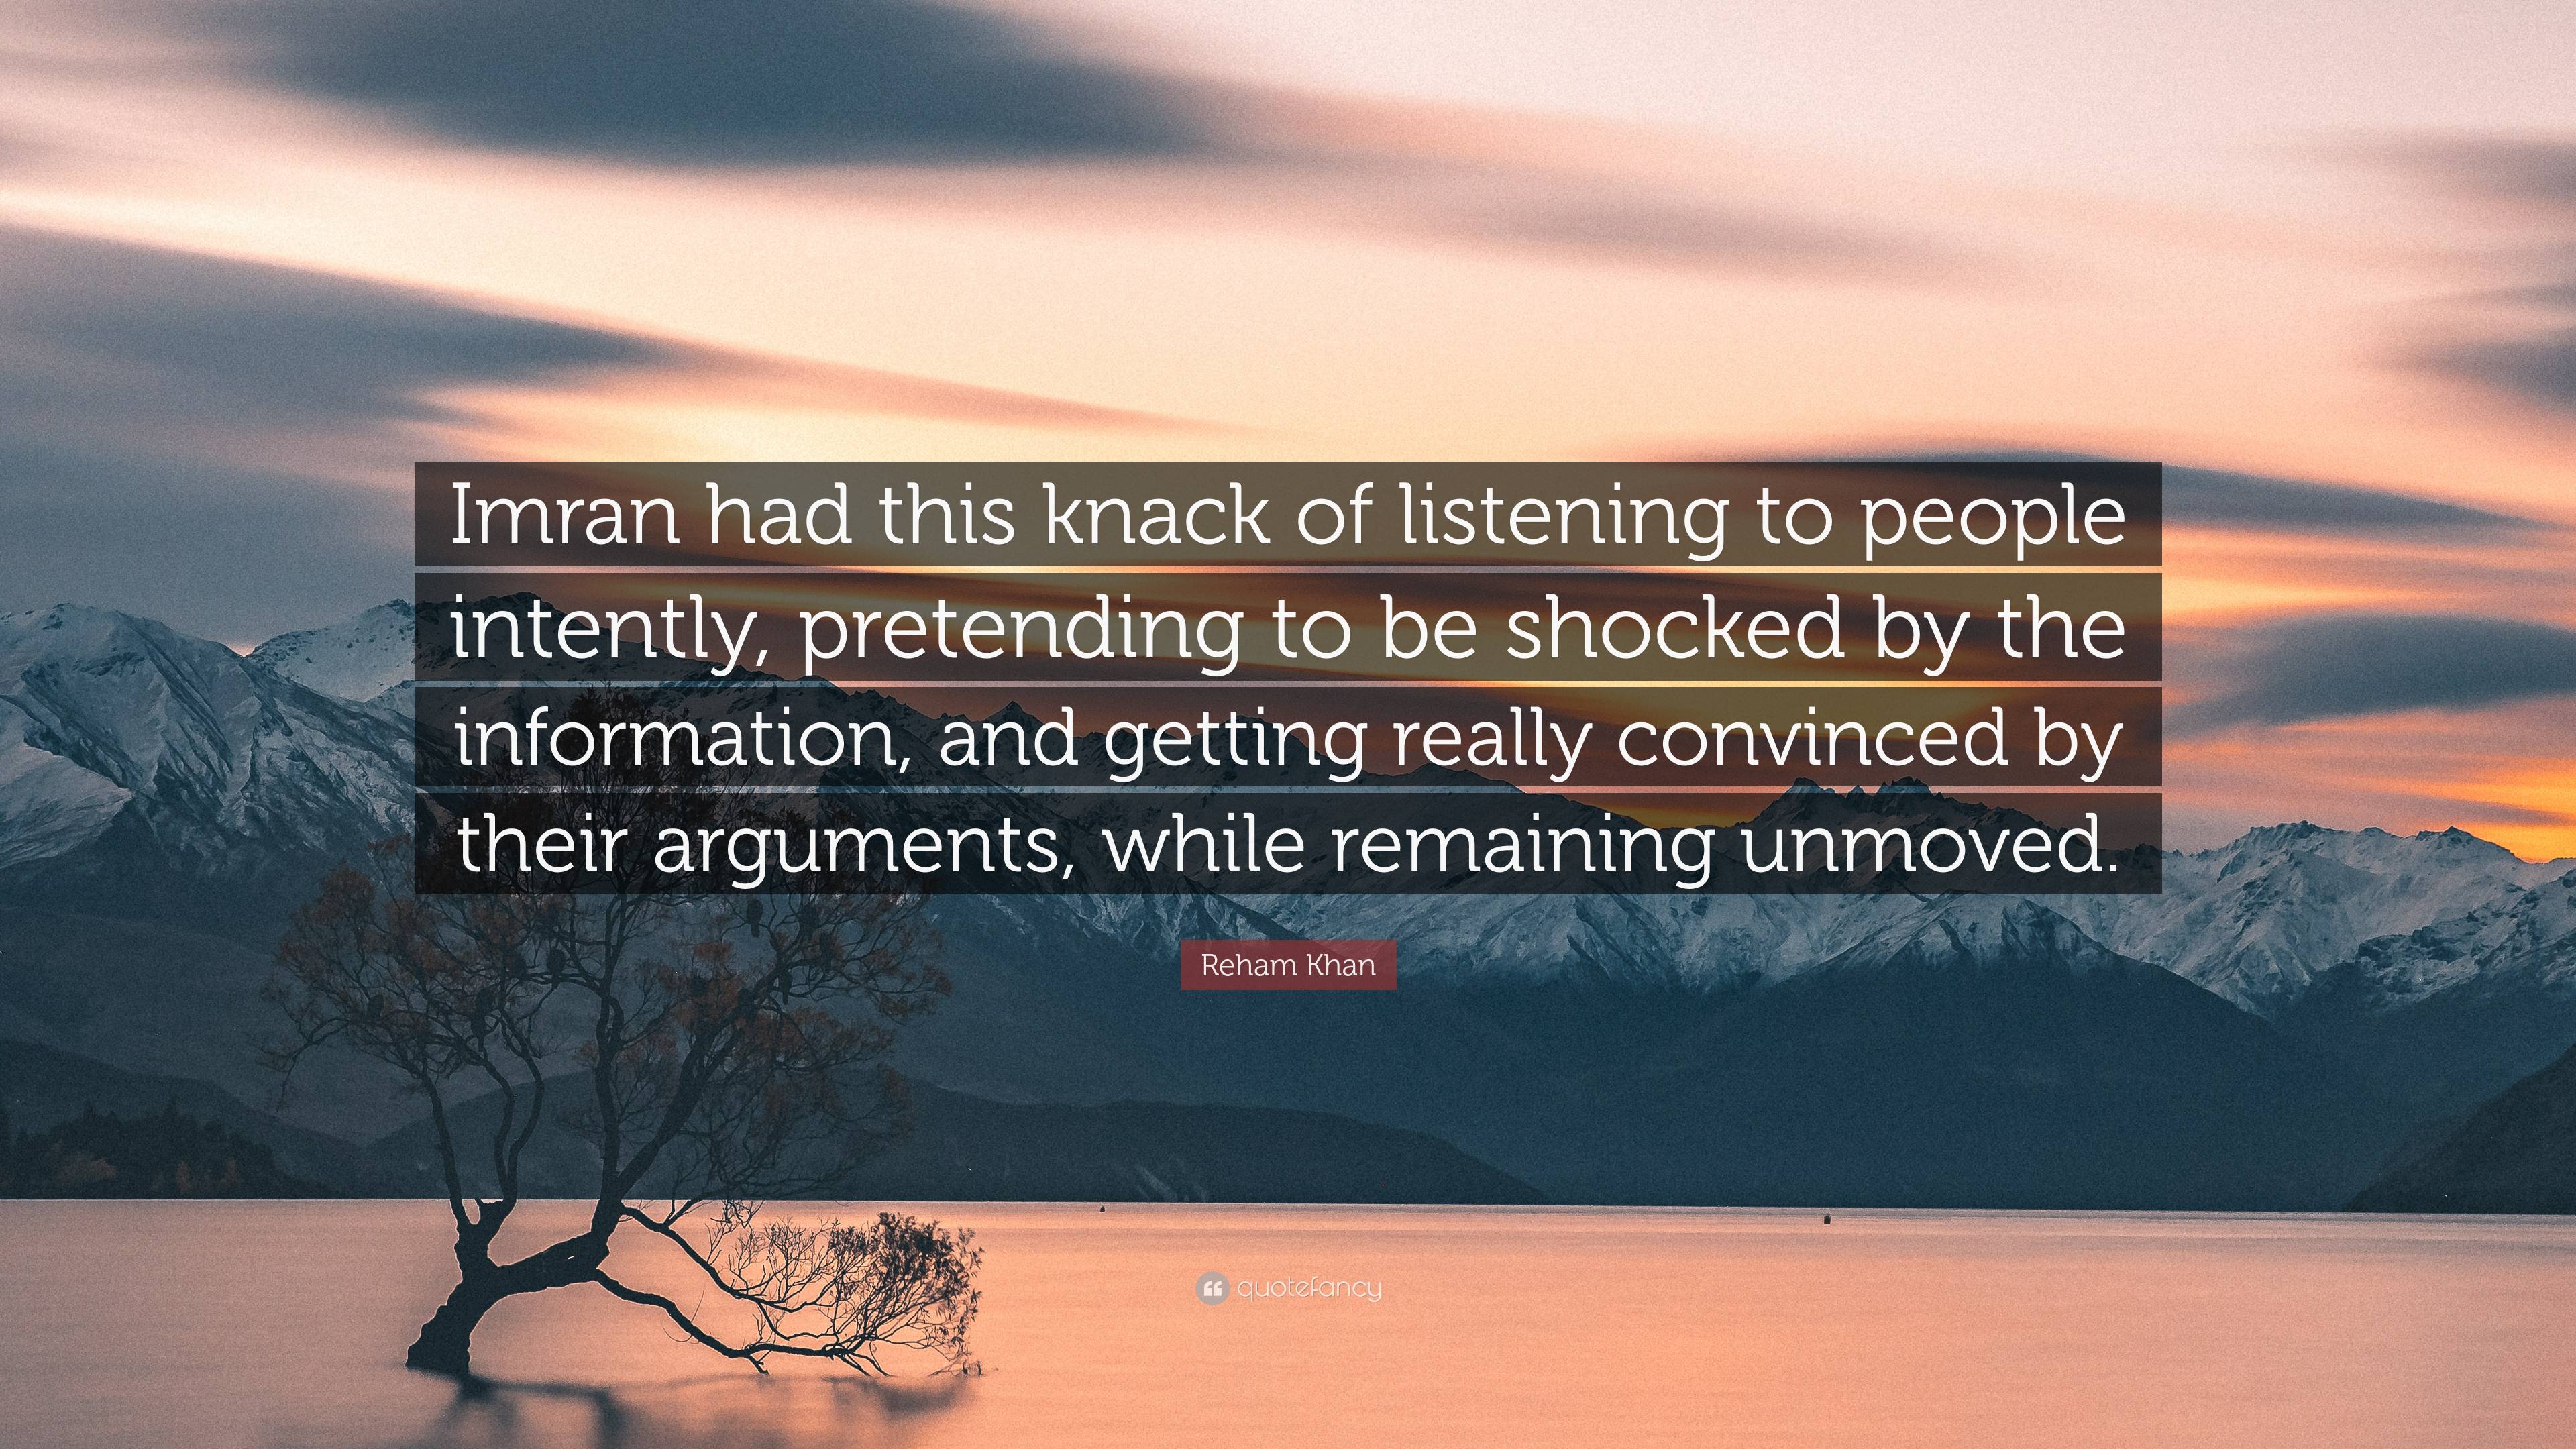 Reham Khan Quote: “Imran had this knack of listening to people intently,  pretending to be shocked by the information, and getting really co”